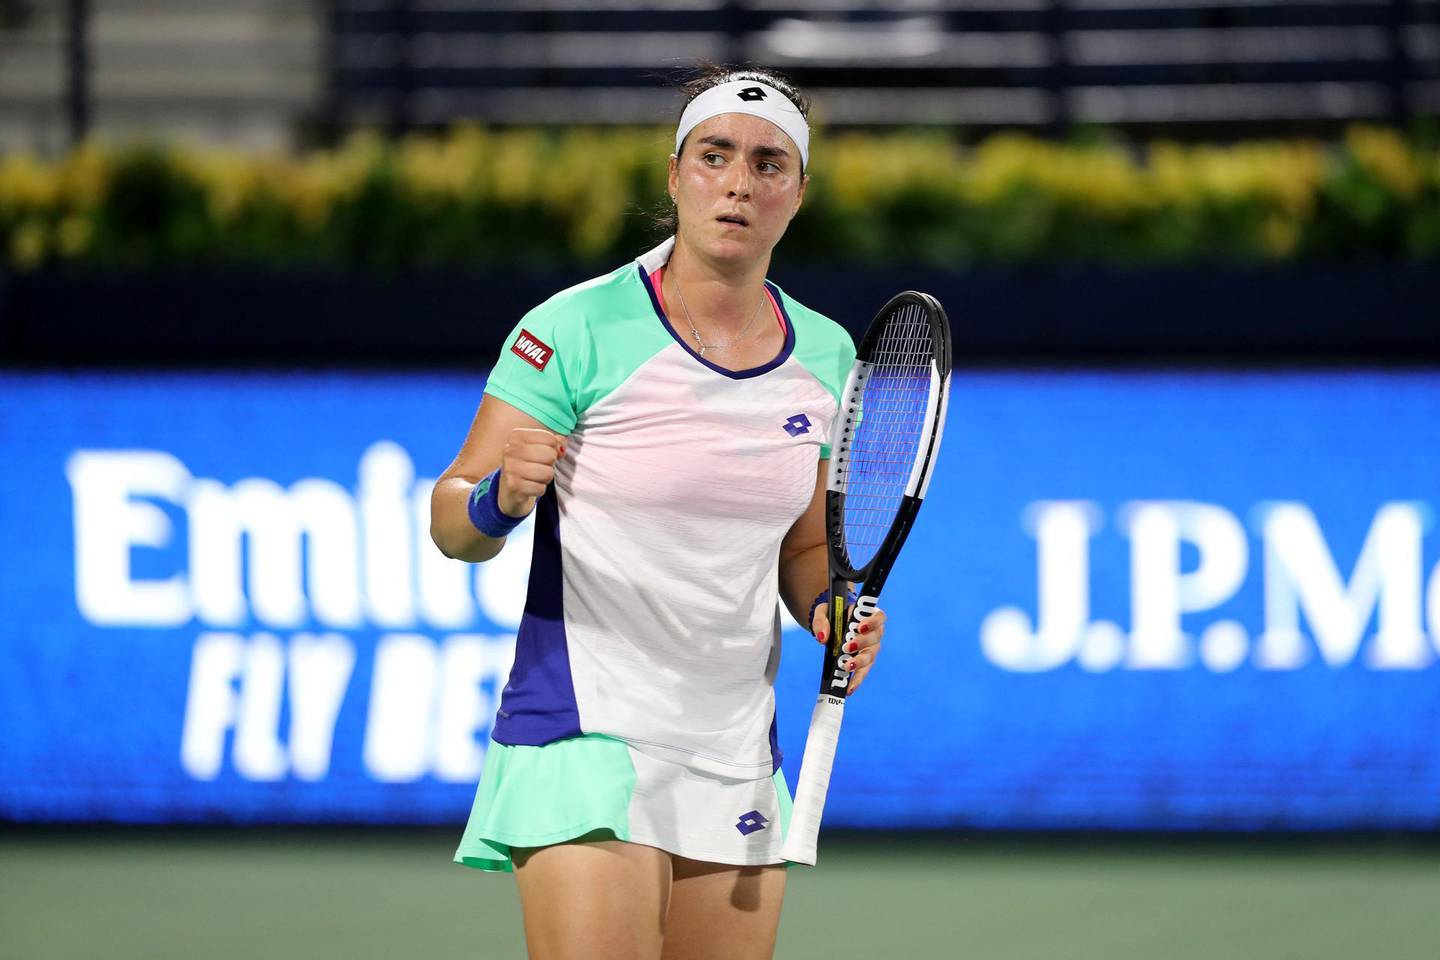 Dubai, United Arab Emirates - Reporter: John McAuley: Ons Jabeur celebrates a point in the game between Ons Jabeur and Alison Riske in the Dubai Duty Free Tennis Championship. Monday, February 17th, 2020. Dubai Duty Free Tennis stadium, Dubai. Chris Whiteoak / The National